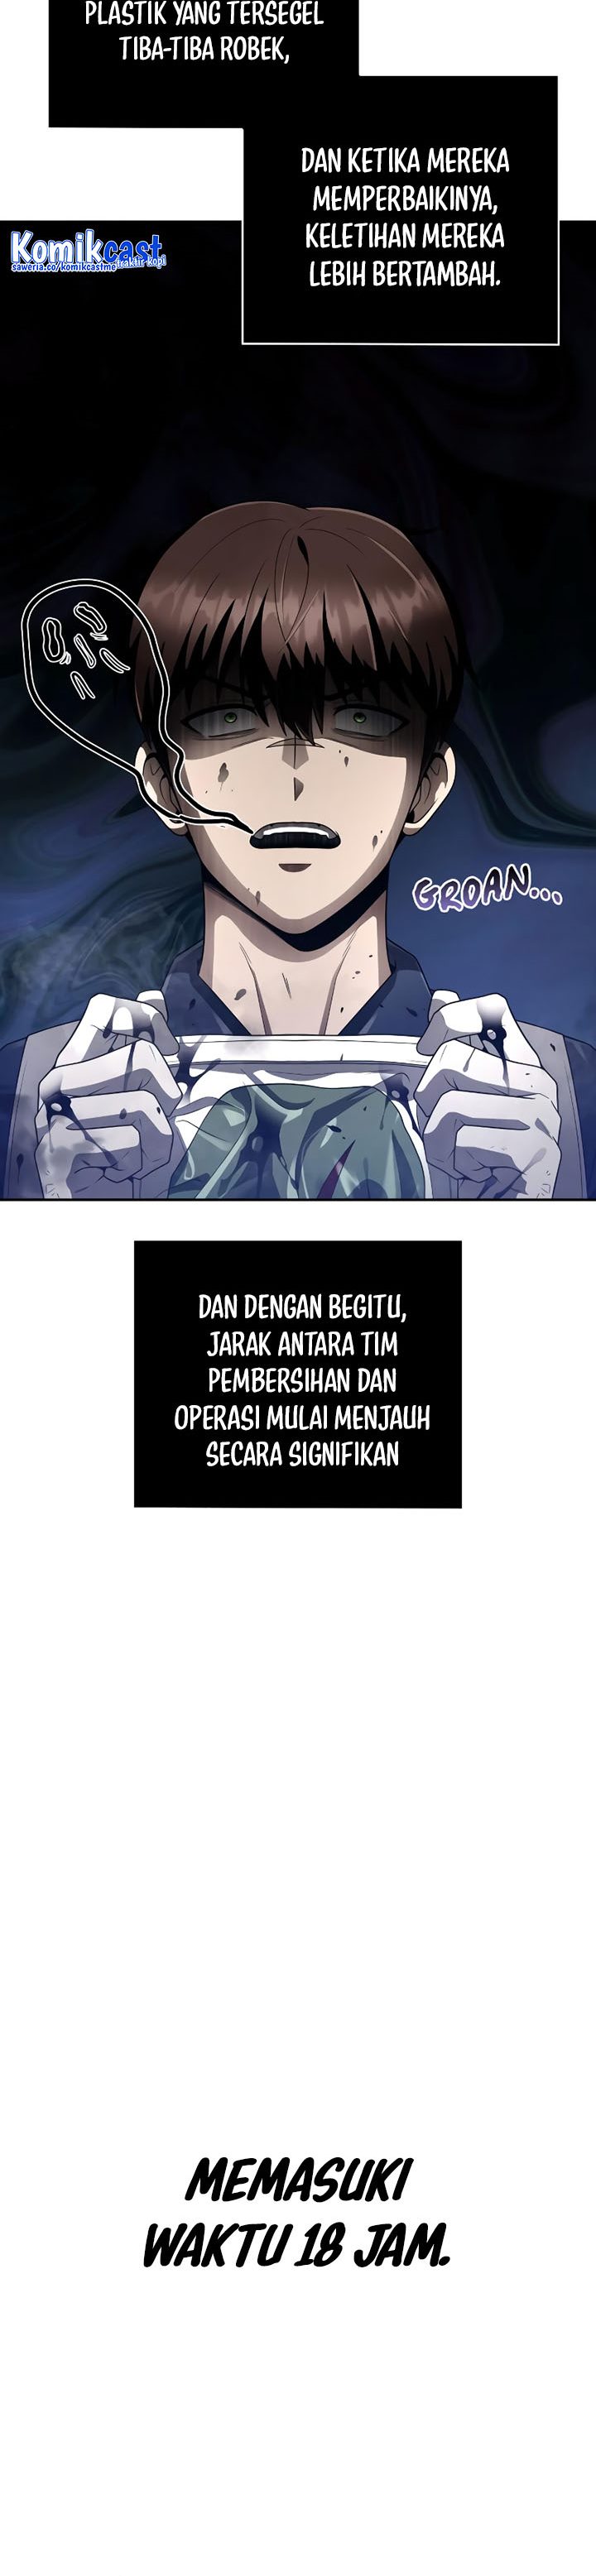 Dilarang COPAS - situs resmi www.mangacanblog.com - Komik clever cleaning life of the returned genius hunter 016 - chapter 16 17 Indonesia clever cleaning life of the returned genius hunter 016 - chapter 16 Terbaru 12|Baca Manga Komik Indonesia|Mangacan